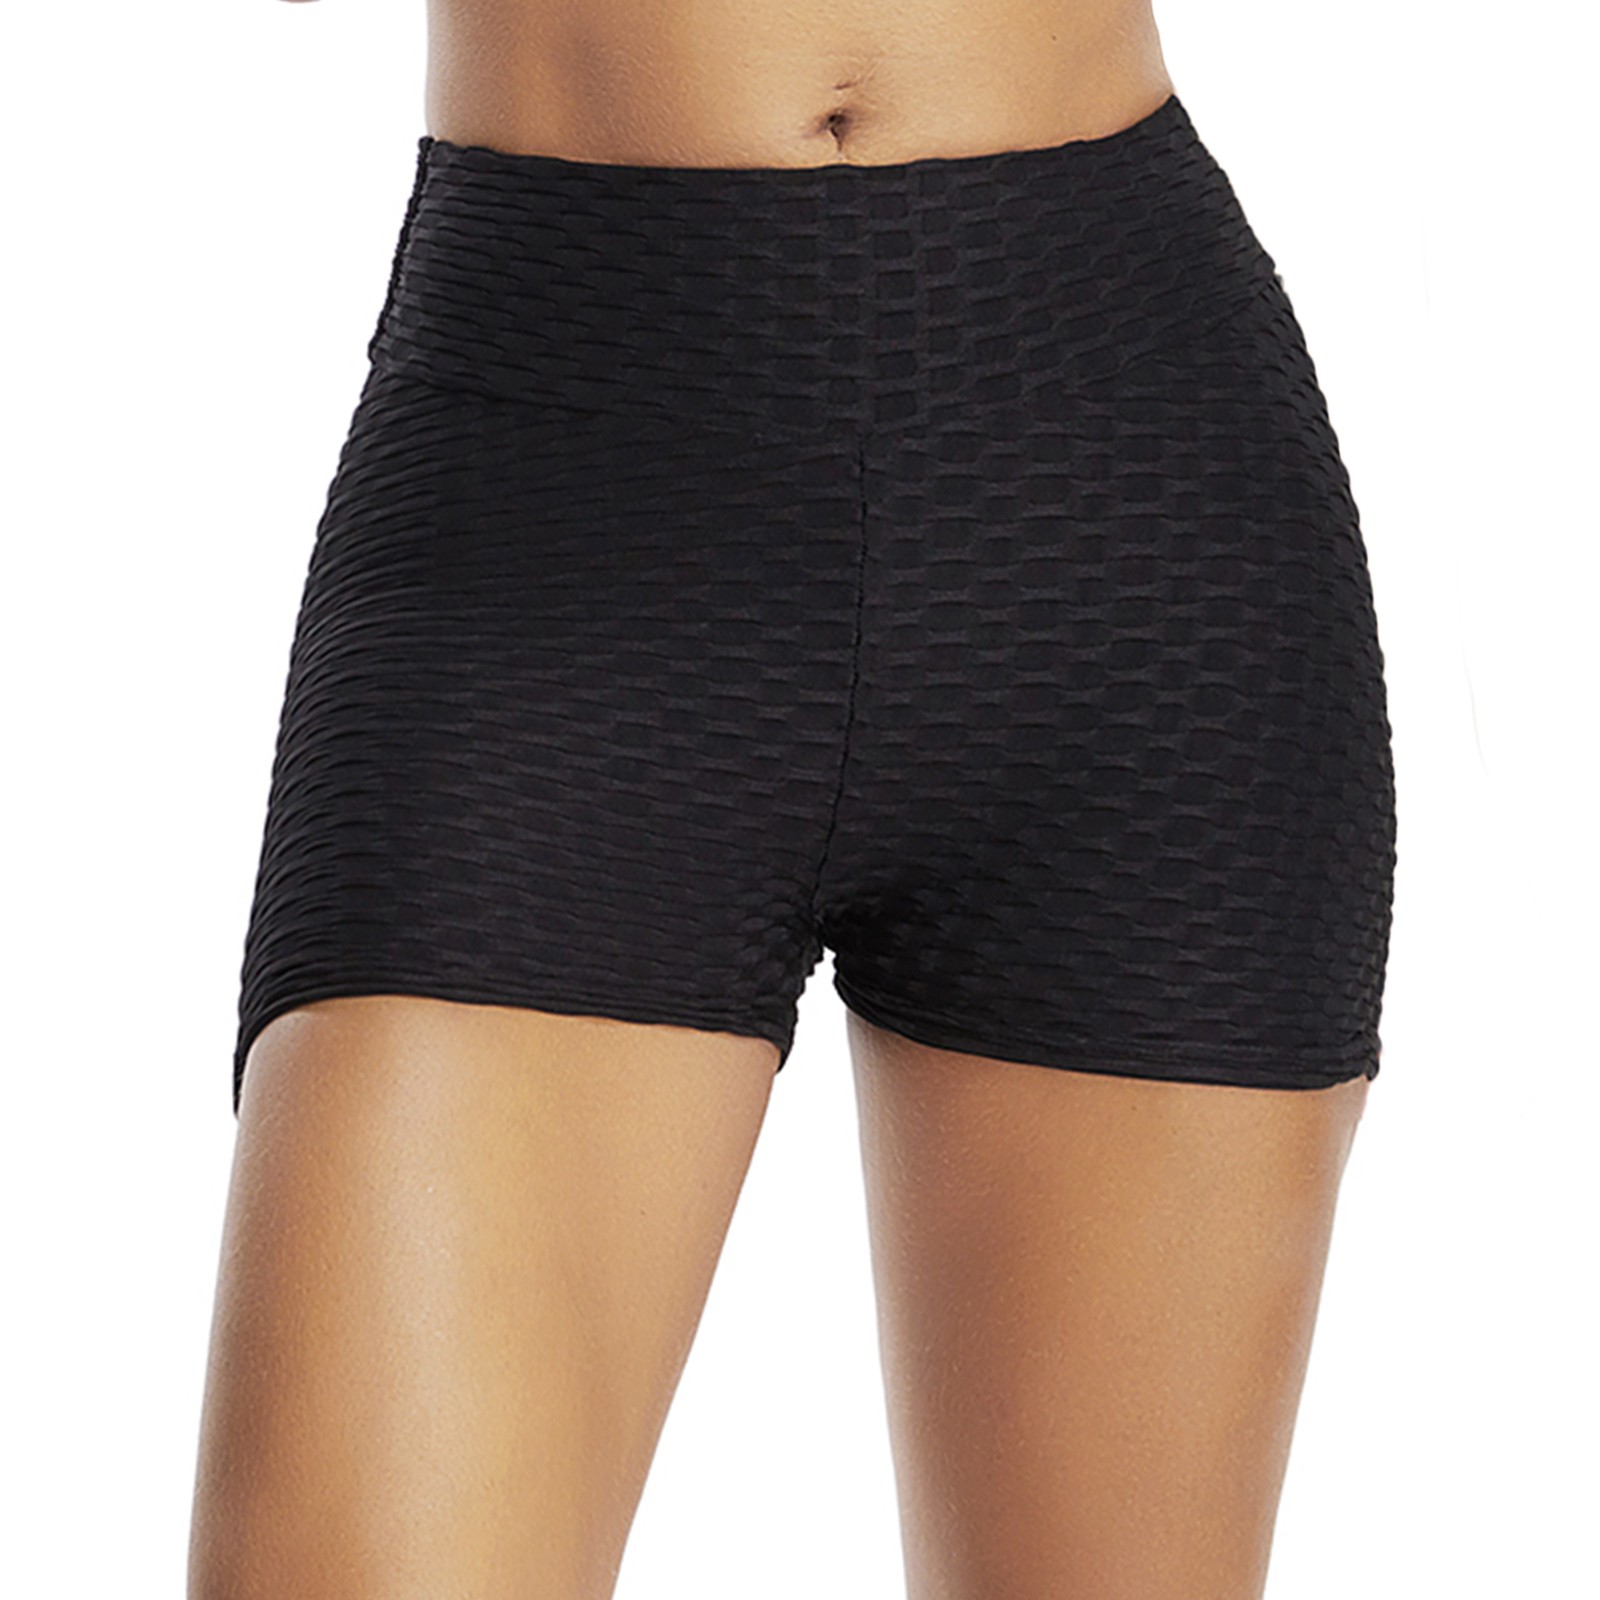 FITTOO Womens Butt Lift High Waist Ruched Workout Tights Stretch Yoga Gym Shorts - image 3 of 6